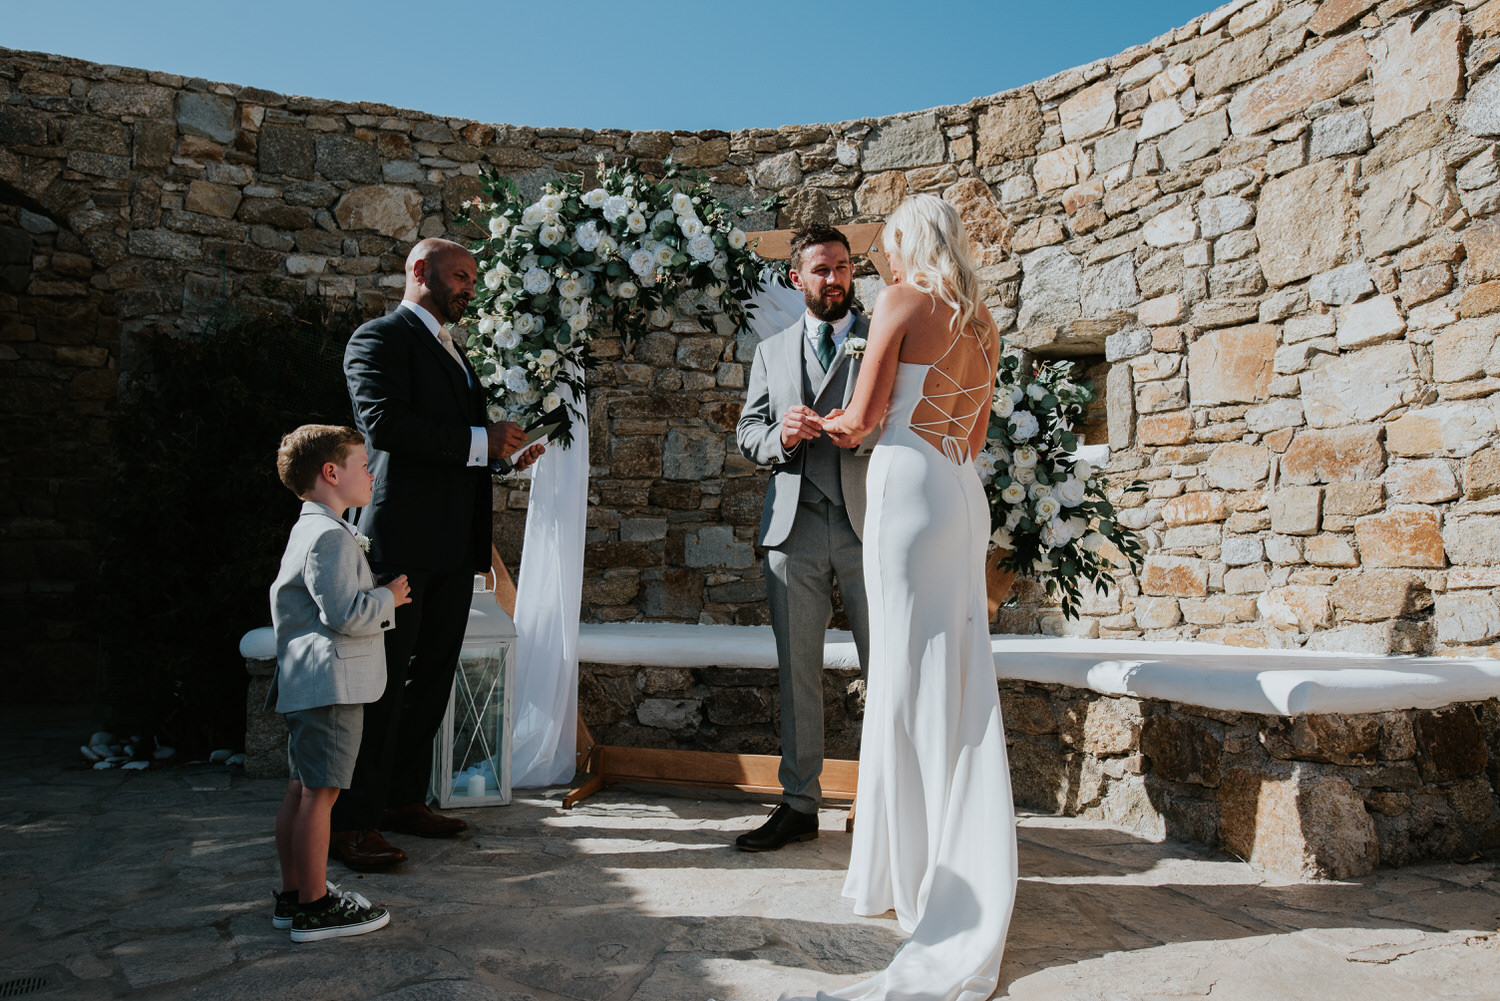 Mykonos wedding photographer: celebrant, ring bearer, bride and groom in front of the floral arch exchanging the rings in afternoon sun.